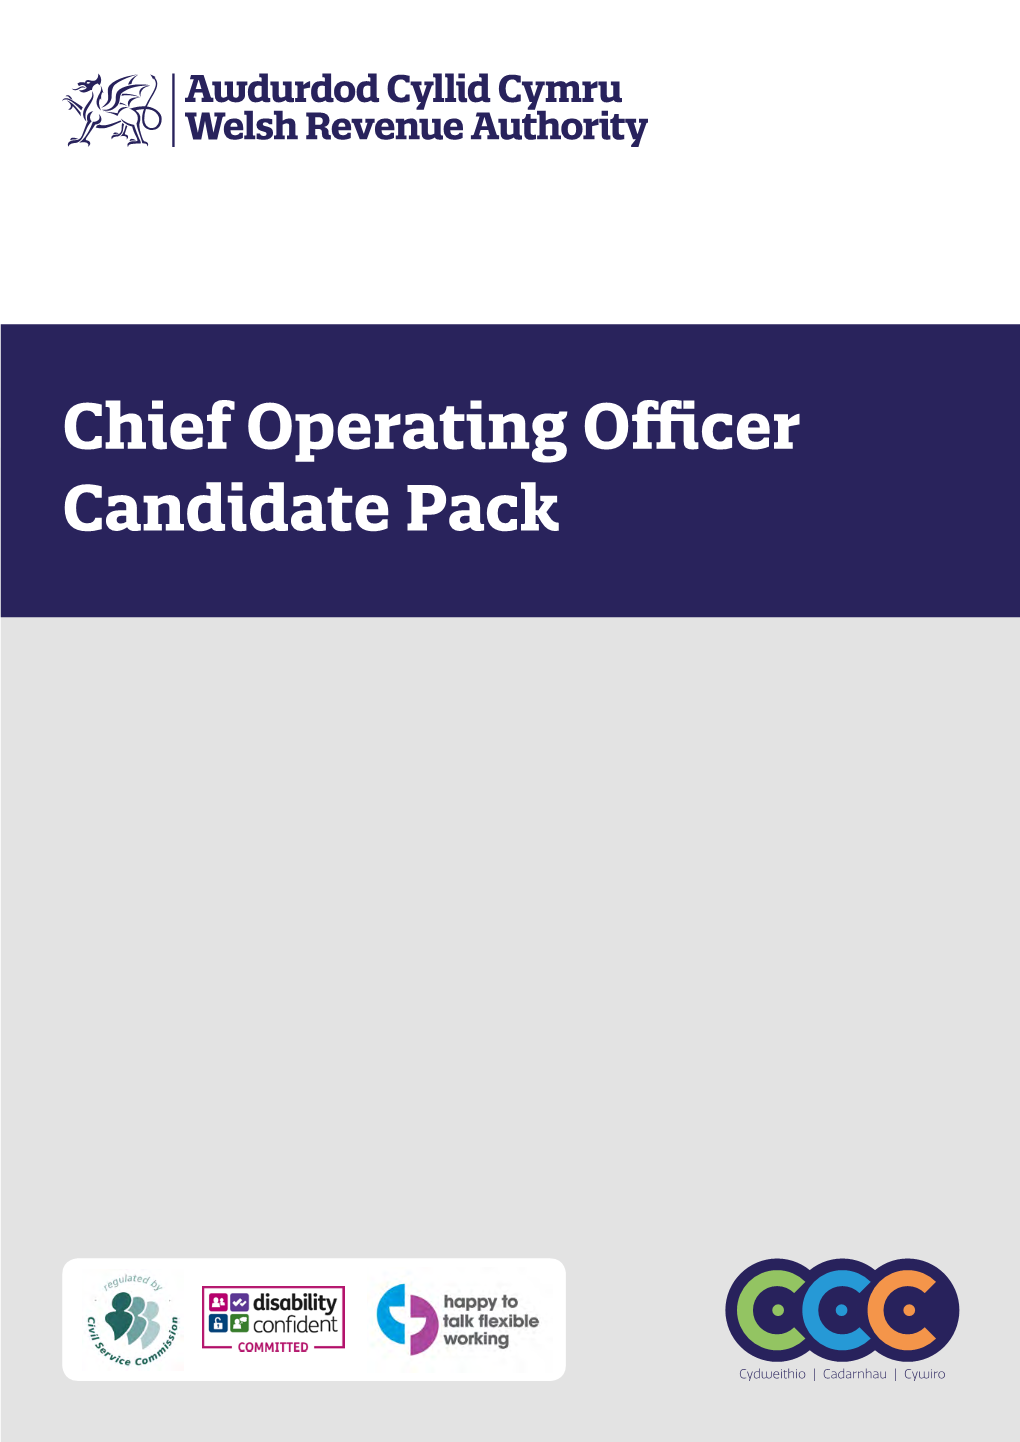 Chief Operating Officer Candidate Pack Message from the Chief Executive